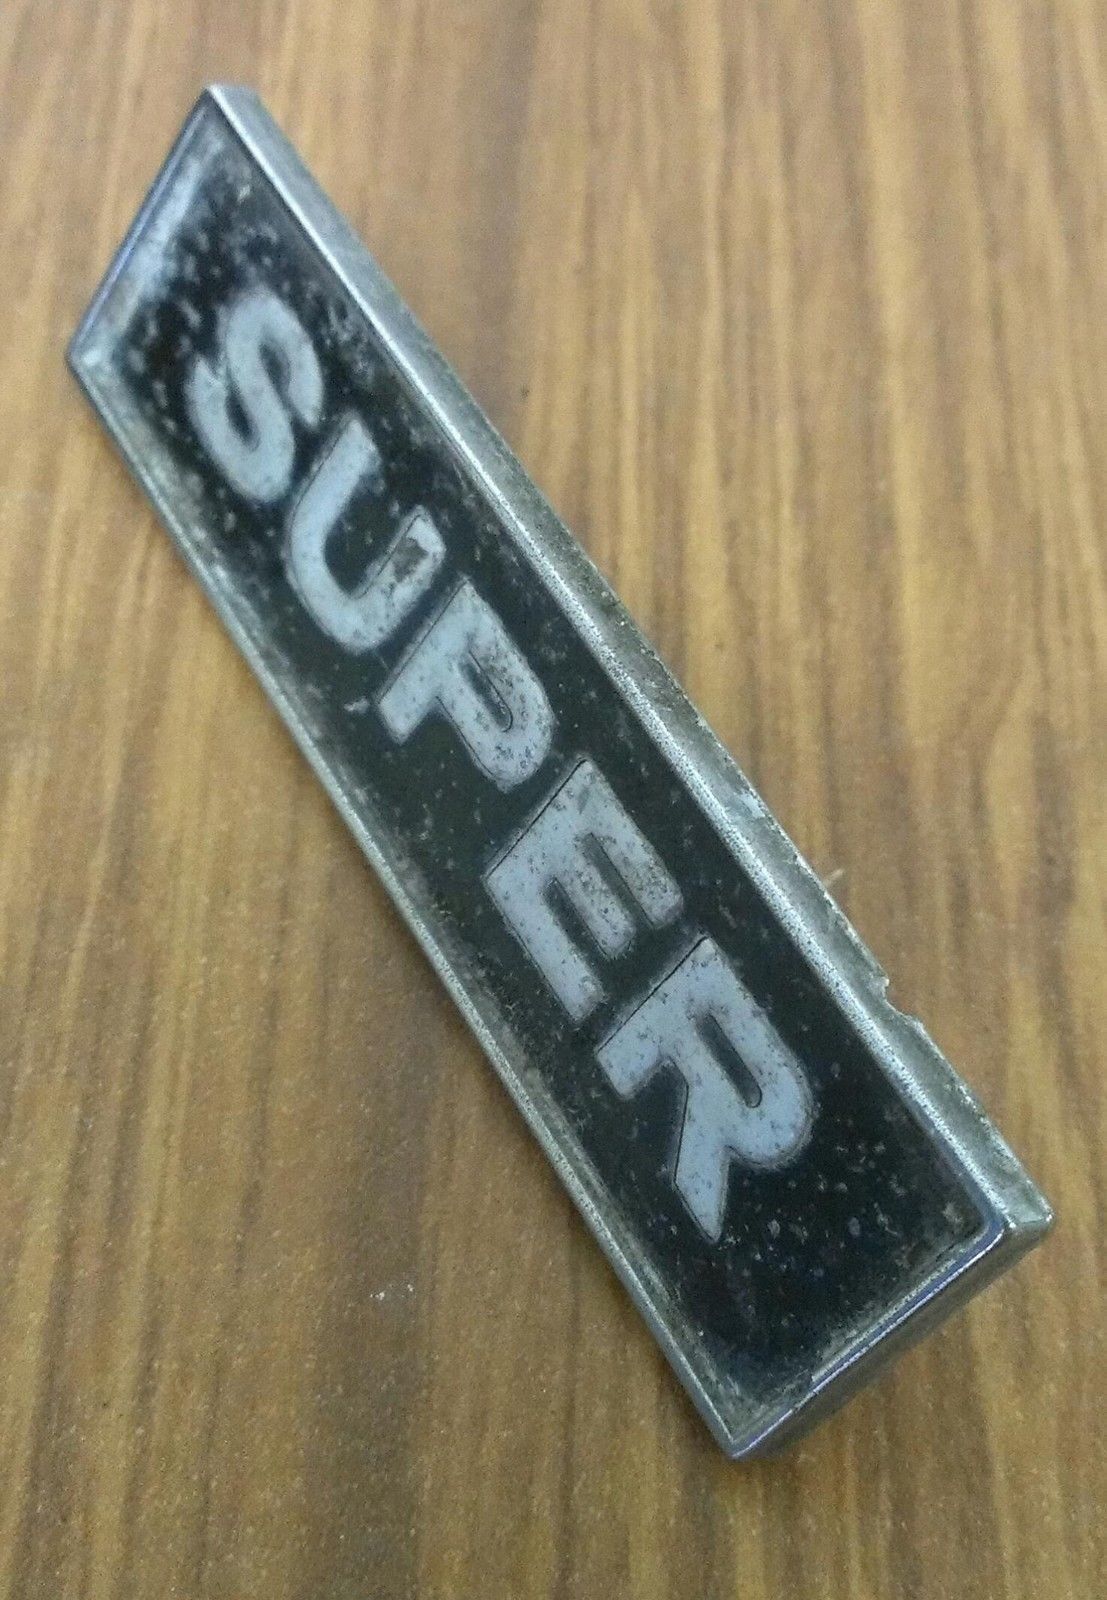 Super car block badge, fair condition, 2.6 inches long, prongs intact.